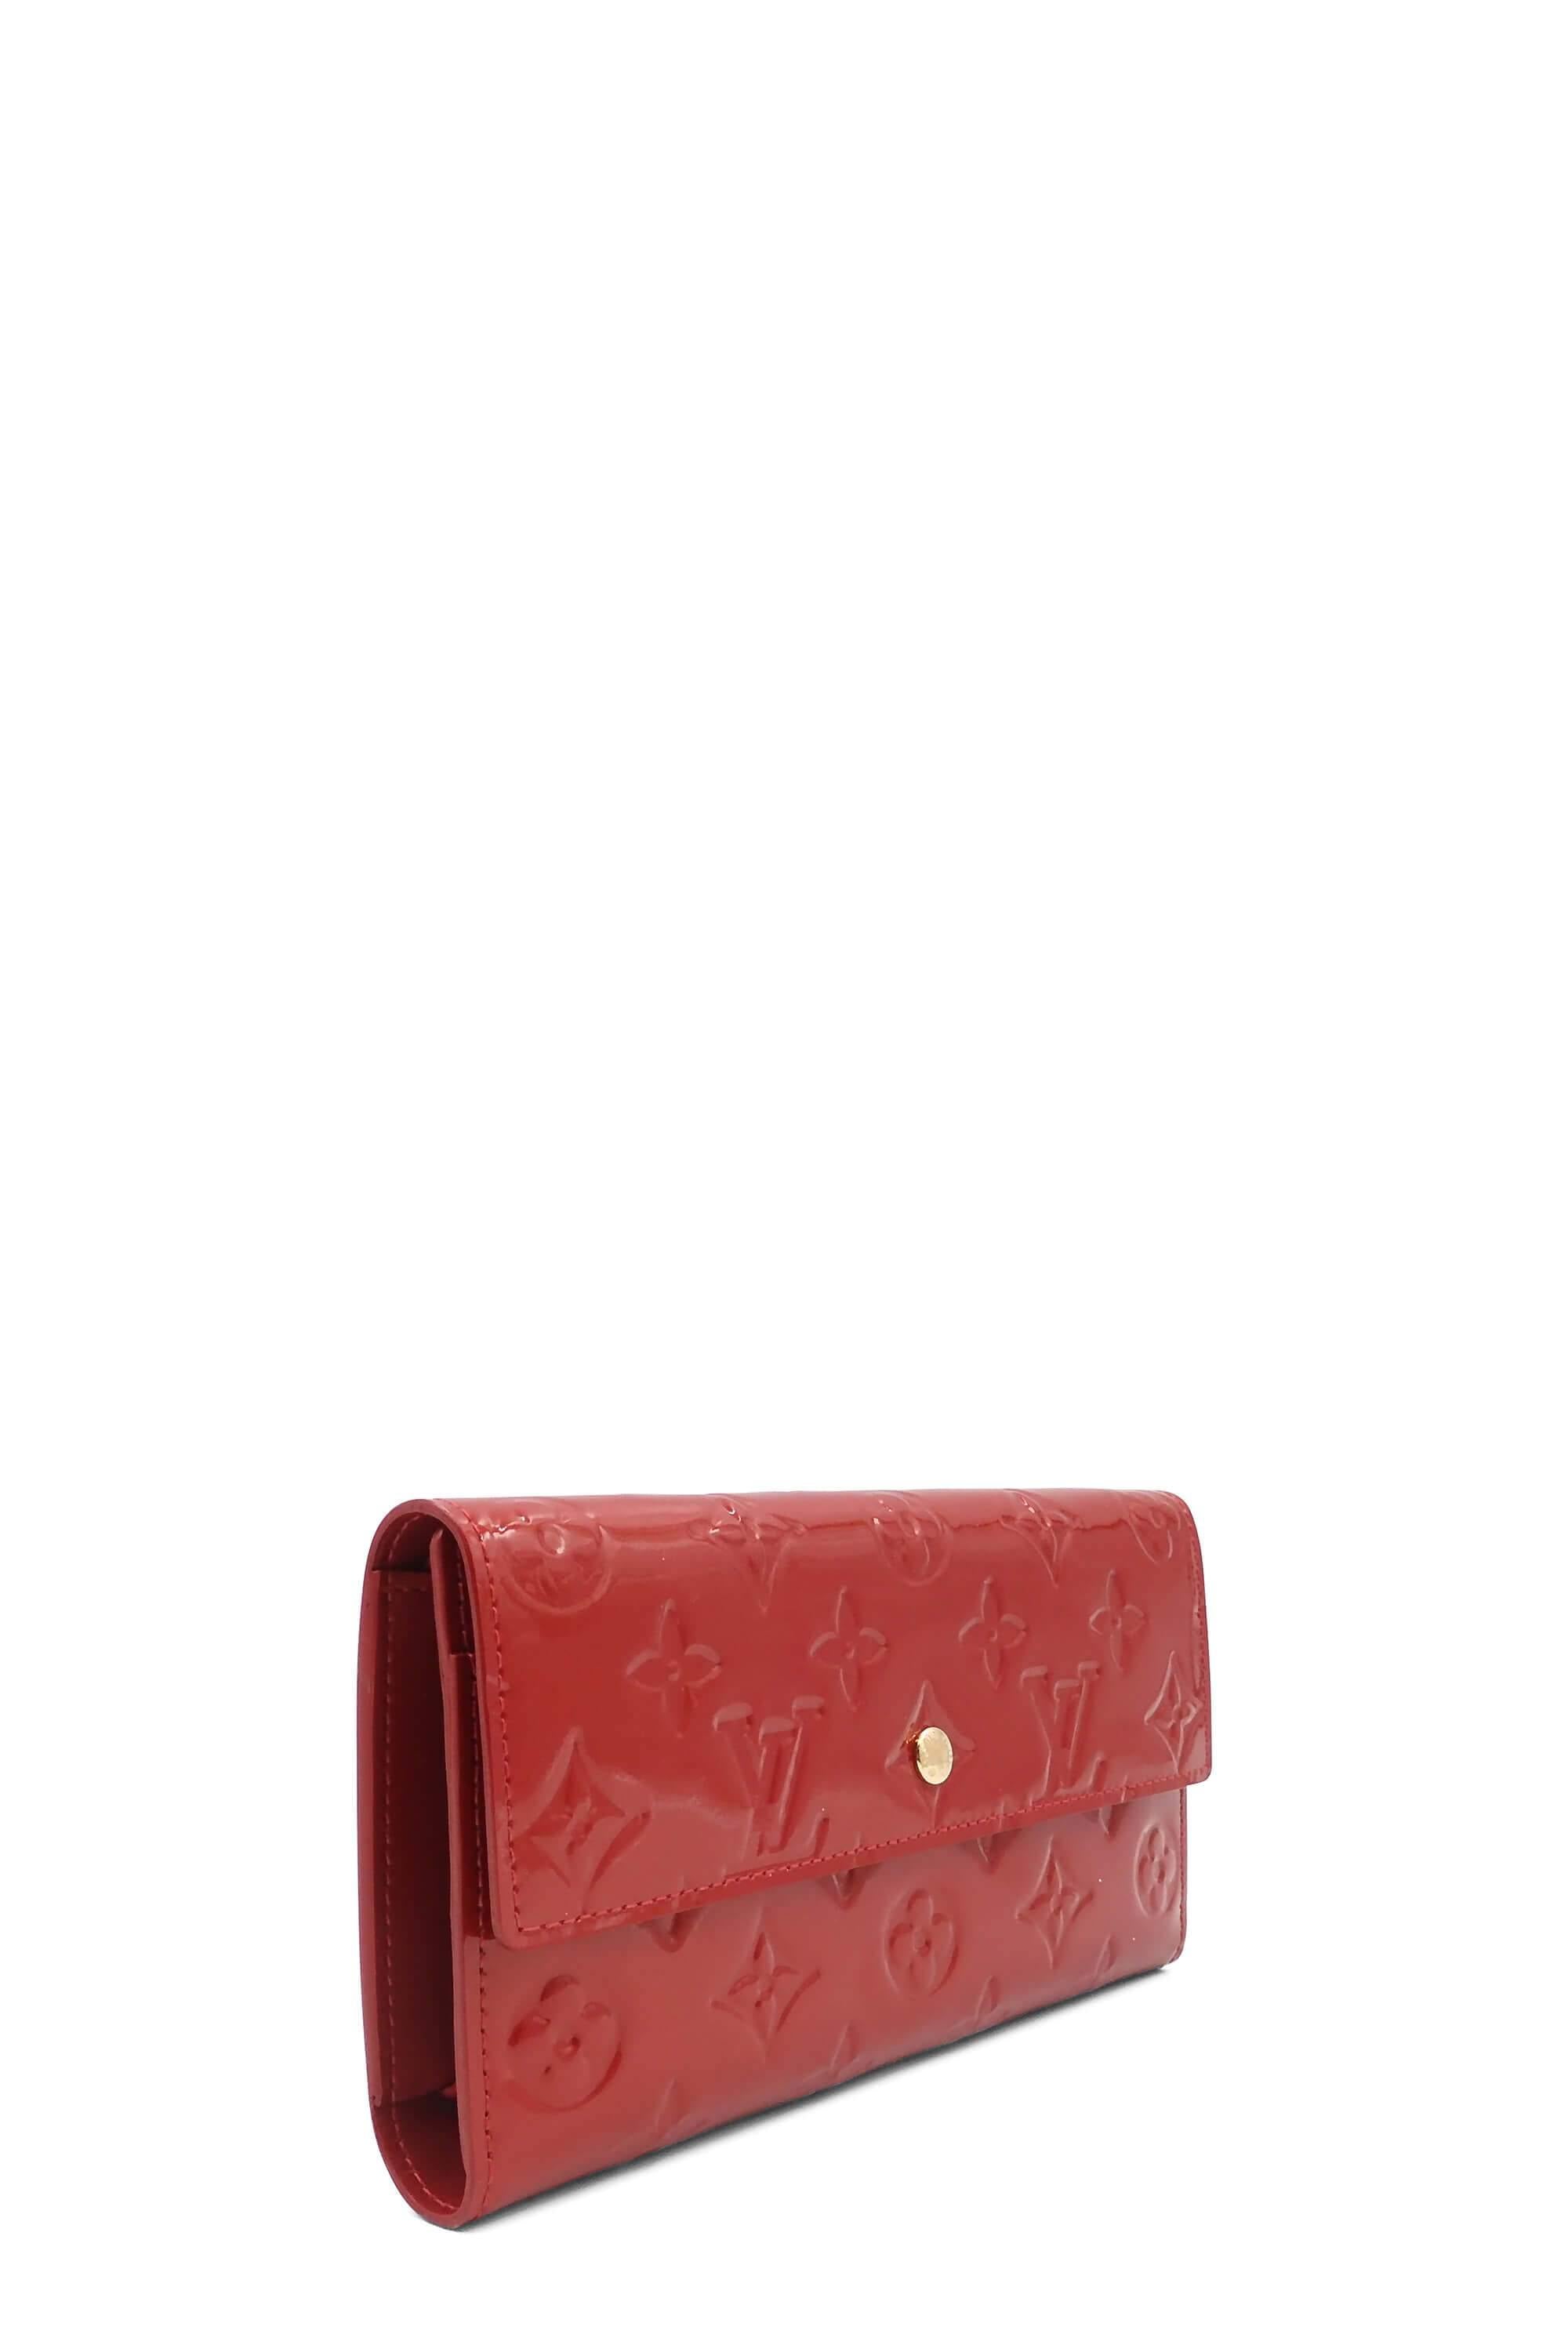 Buy Authentic, Preloved Louis Vuitton Monogram Vernis Sarah Wallet Red Bags  from Second Edit by Style Theory